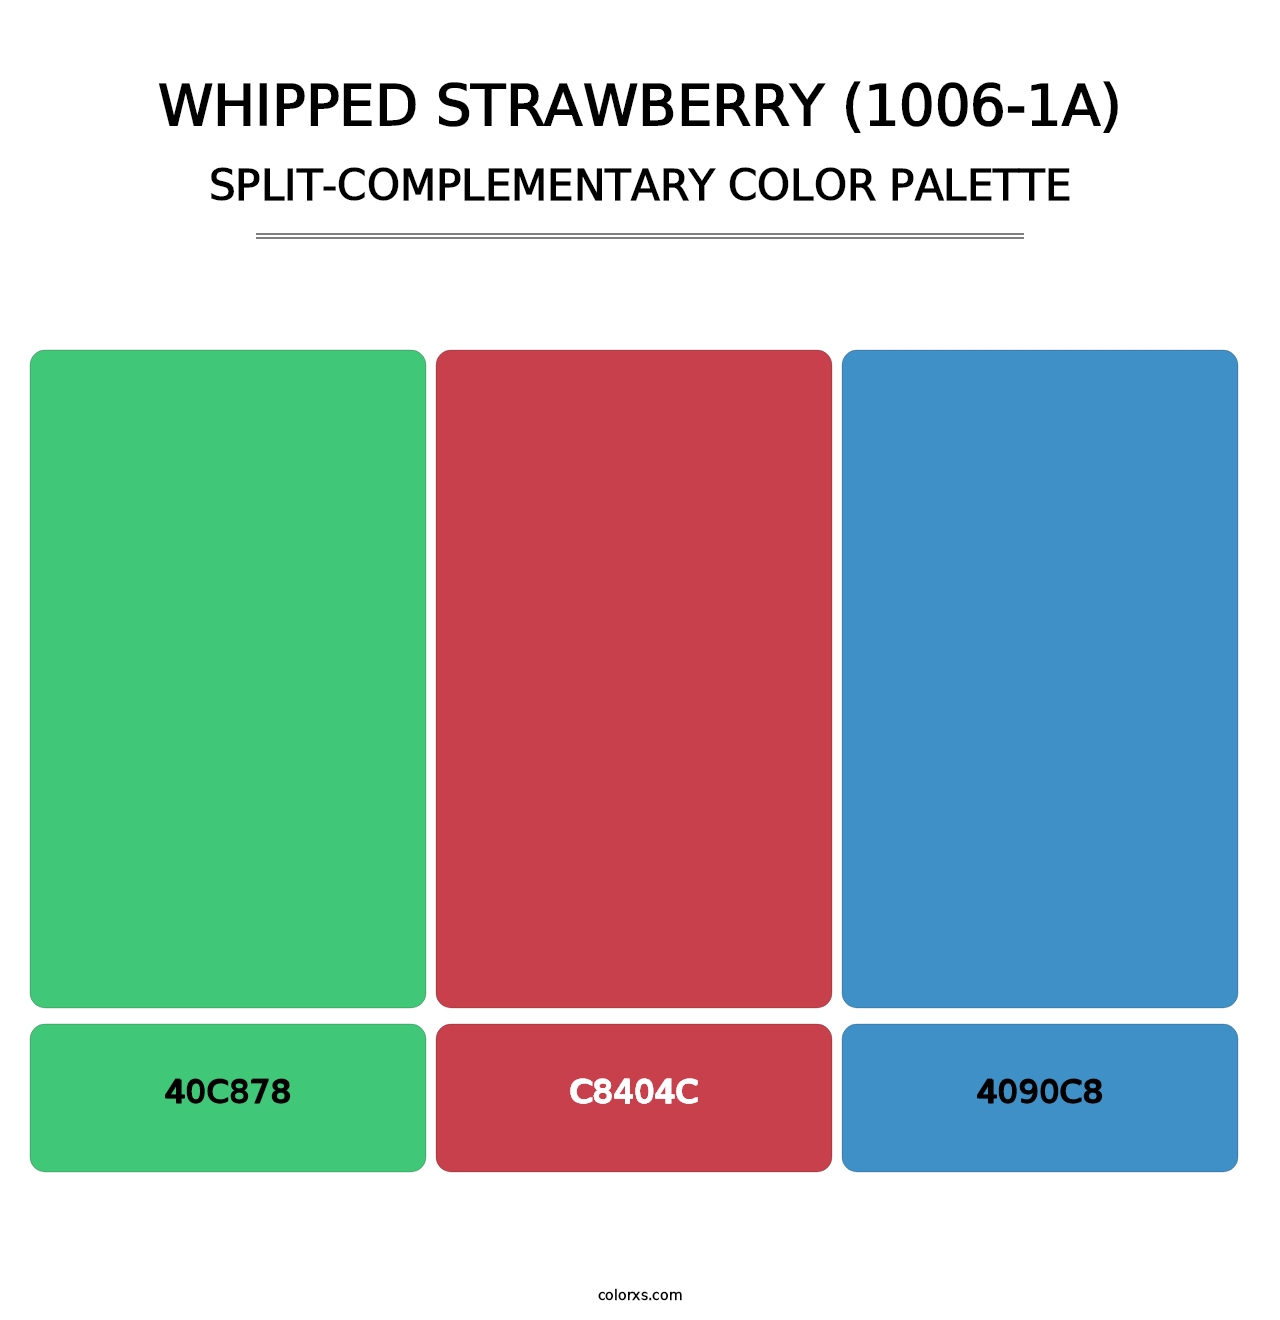 Whipped Strawberry (1006-1A) - Split-Complementary Color Palette